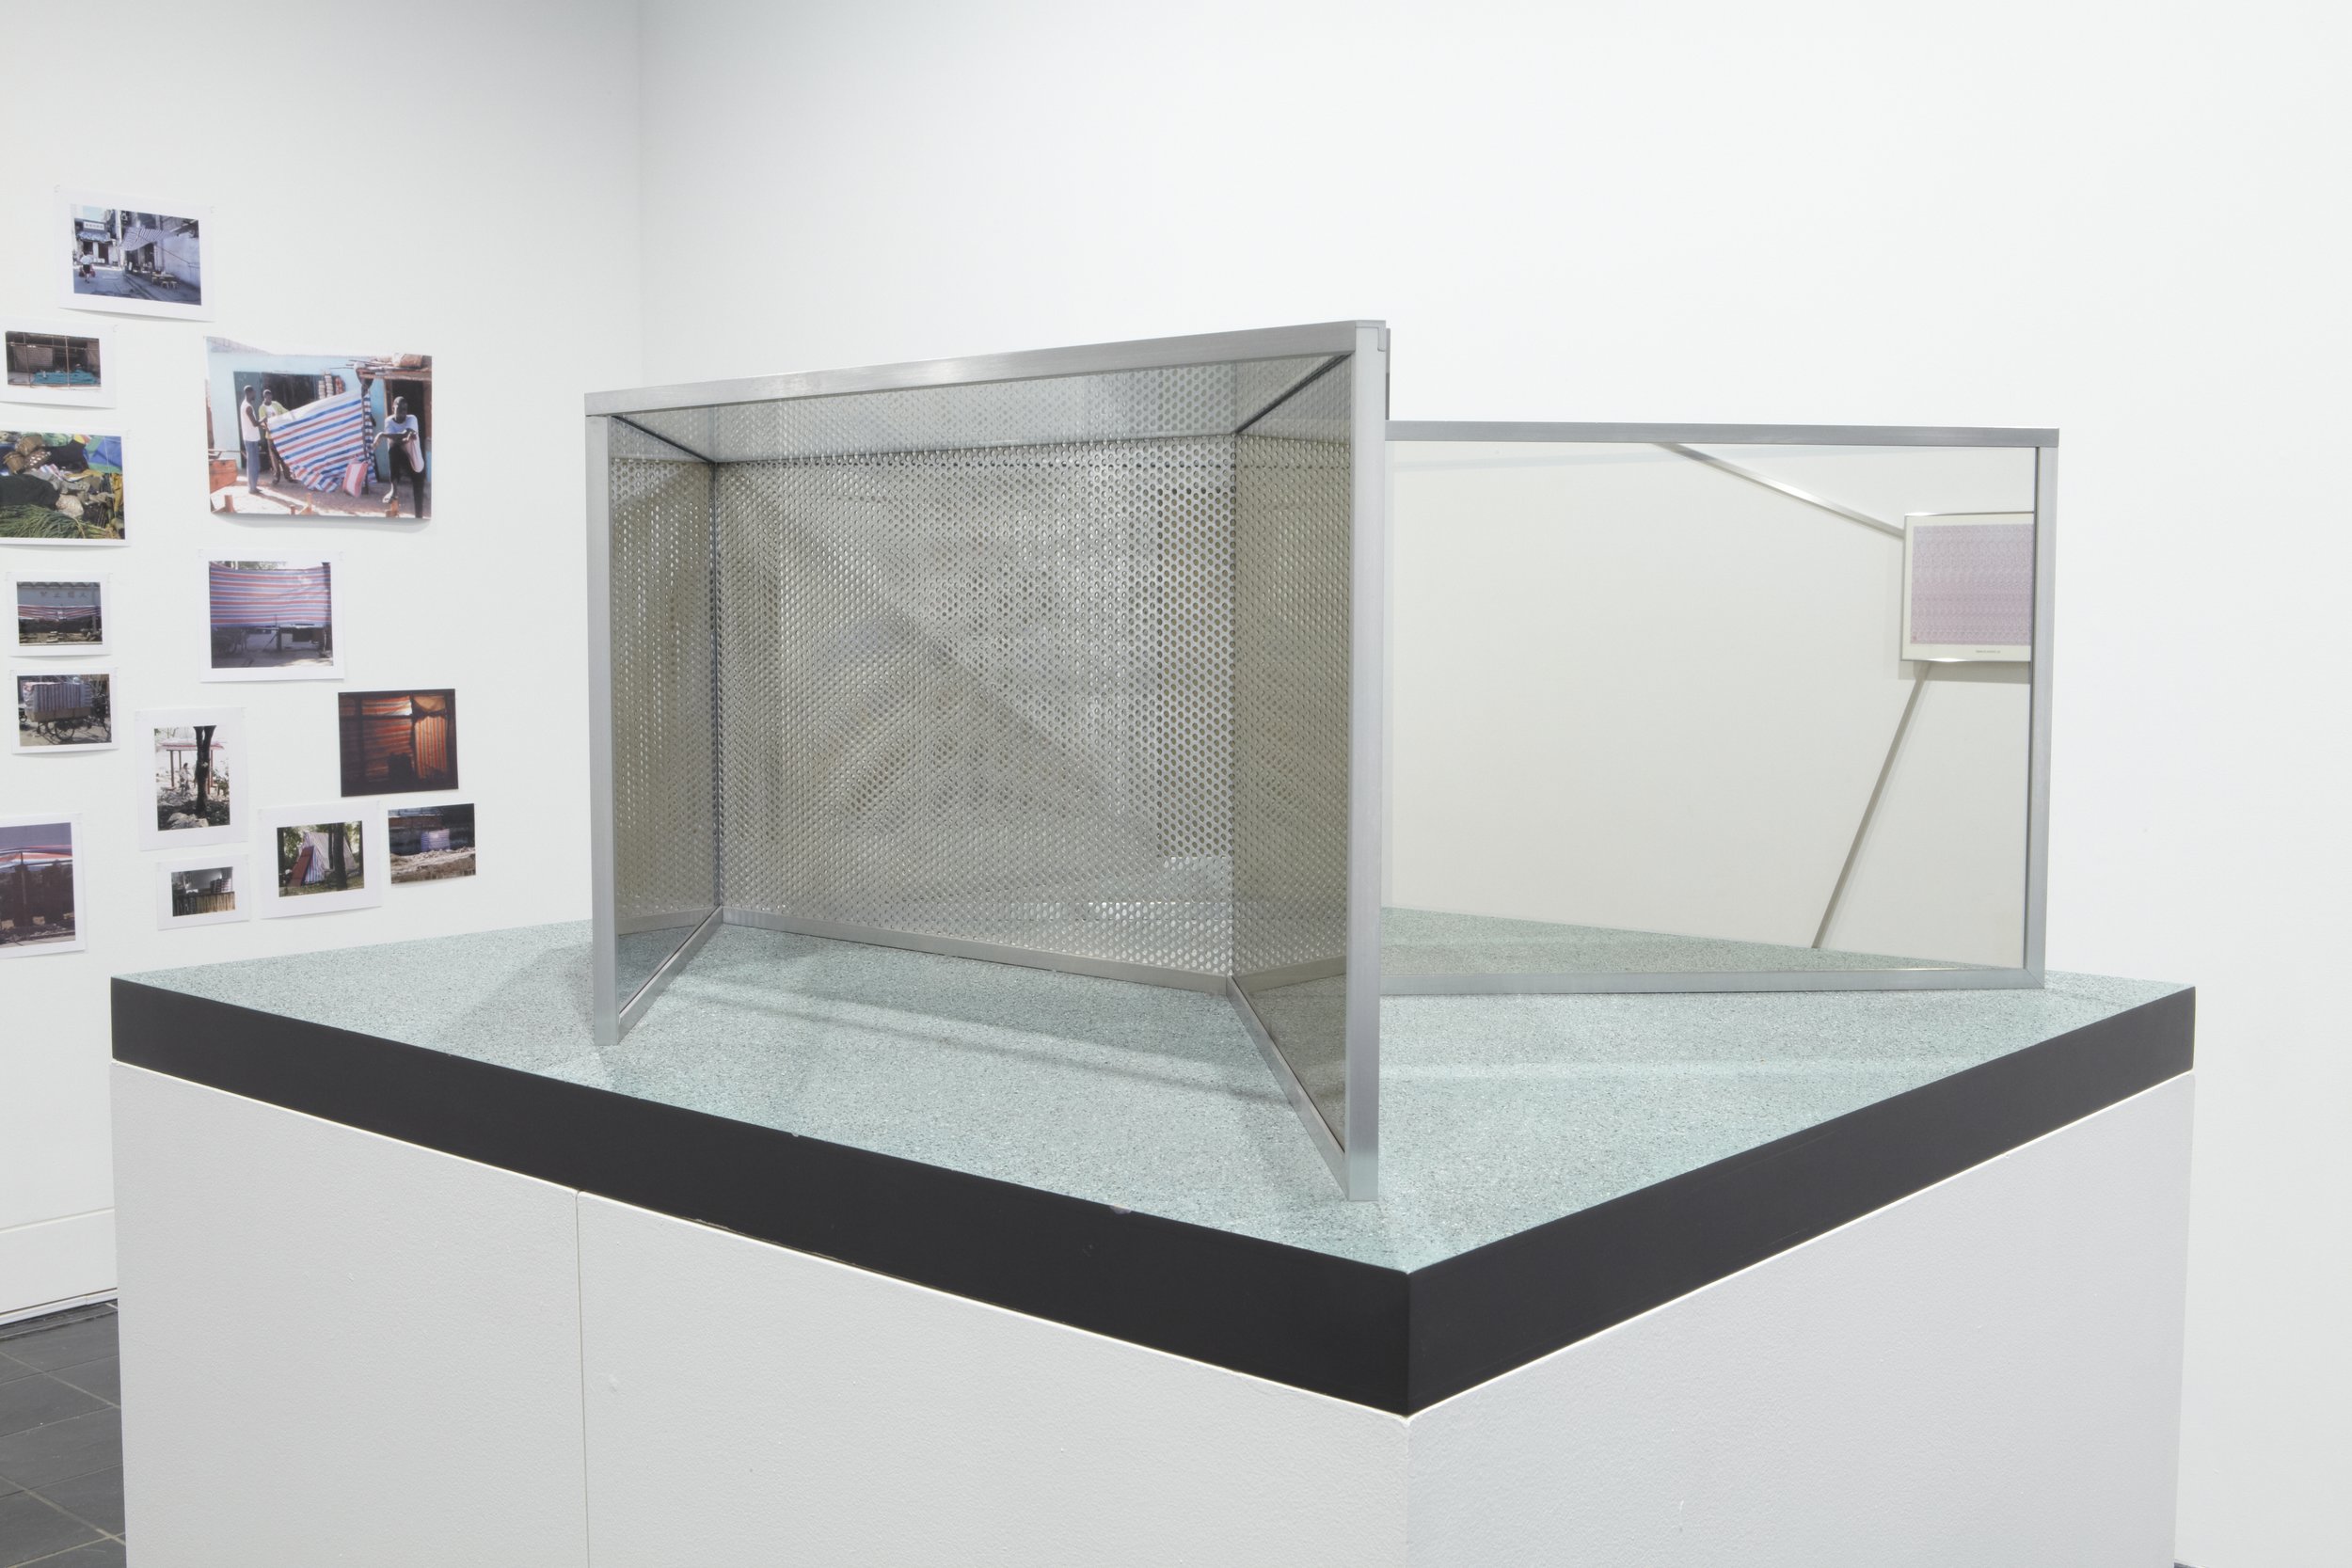  Dan Graham,&nbsp; Serpentine II , 1995, two-way mirror, transparent glass, punched aluminum, aluminum,&nbsp;14 x 36 x 30 inches. Courtesy of Marian Goodman Gallery, New York. 